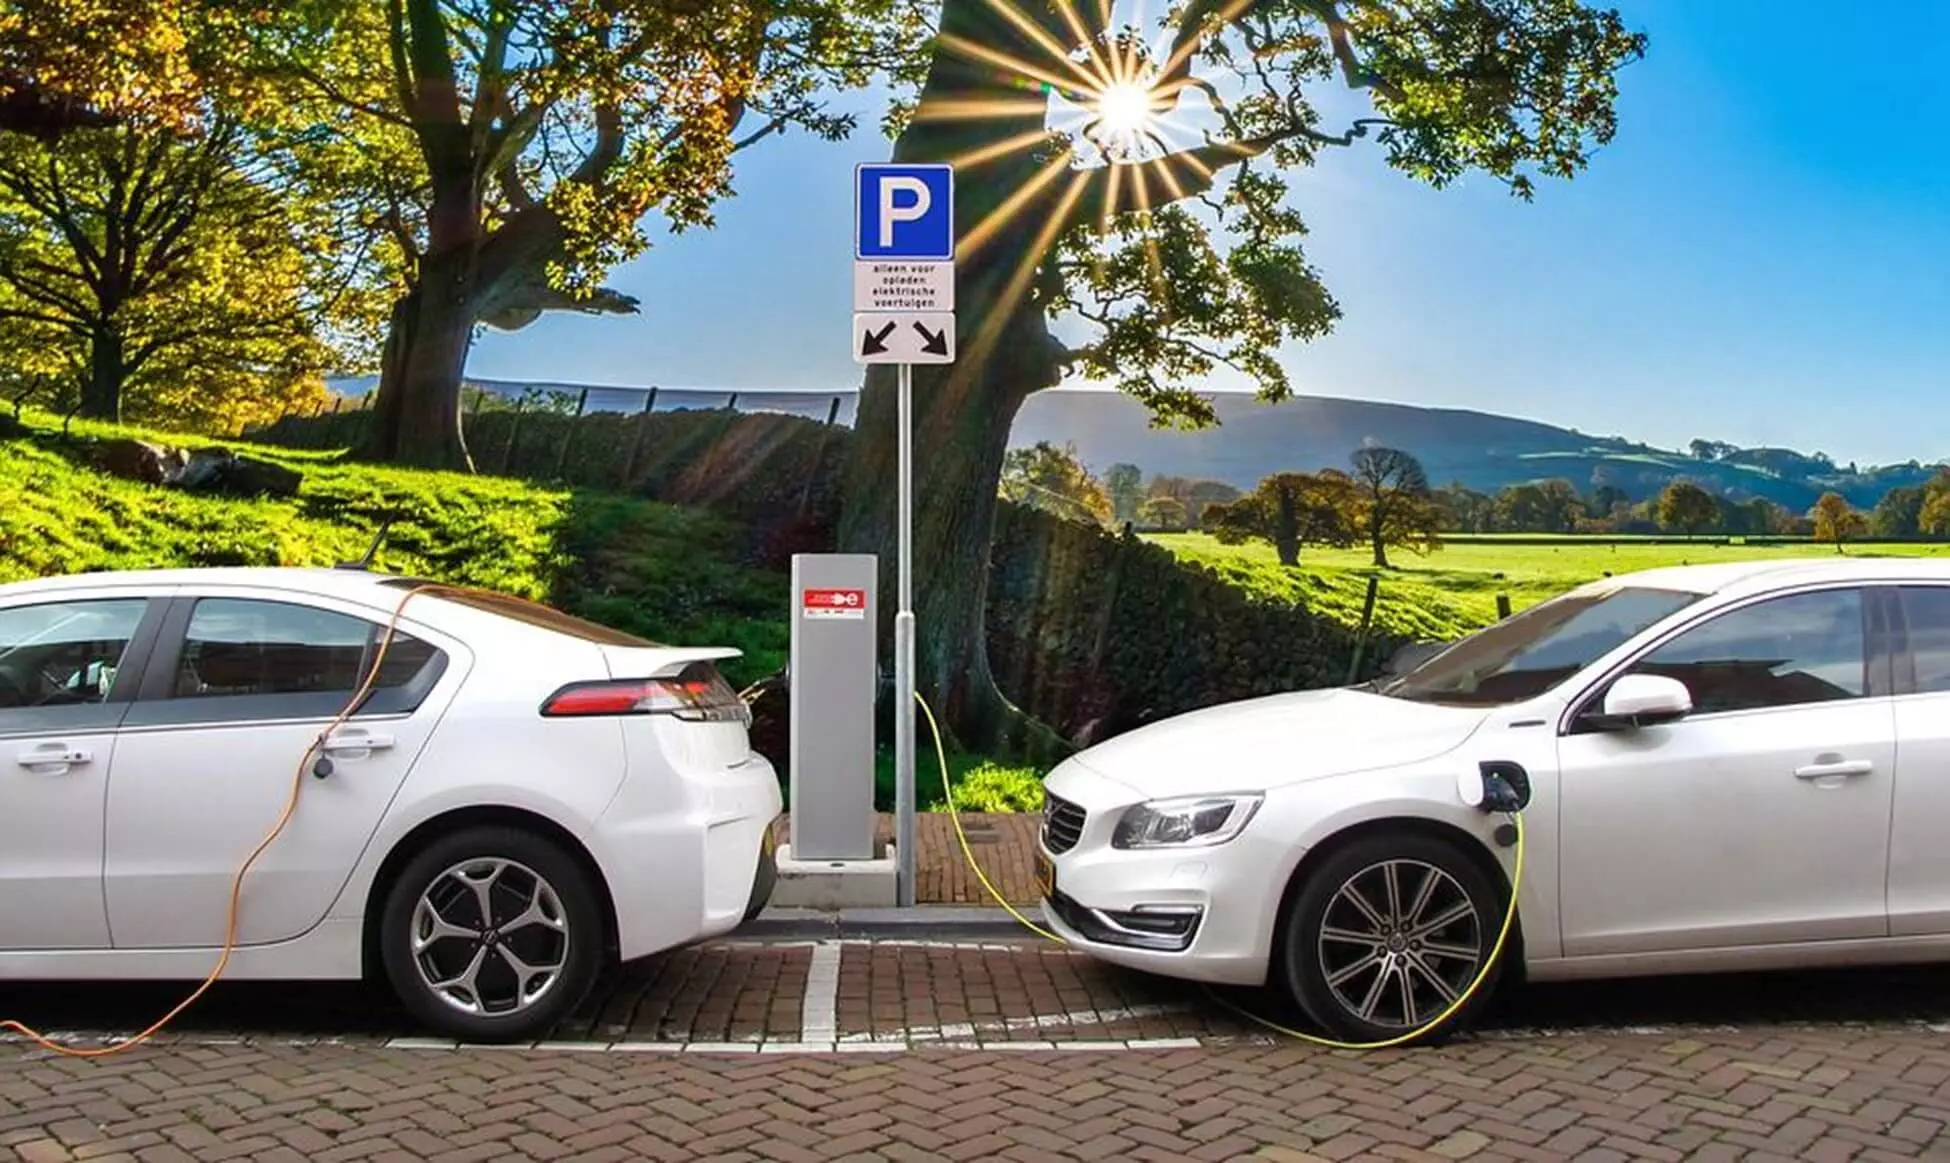 Two electric cars charging at a public charging station